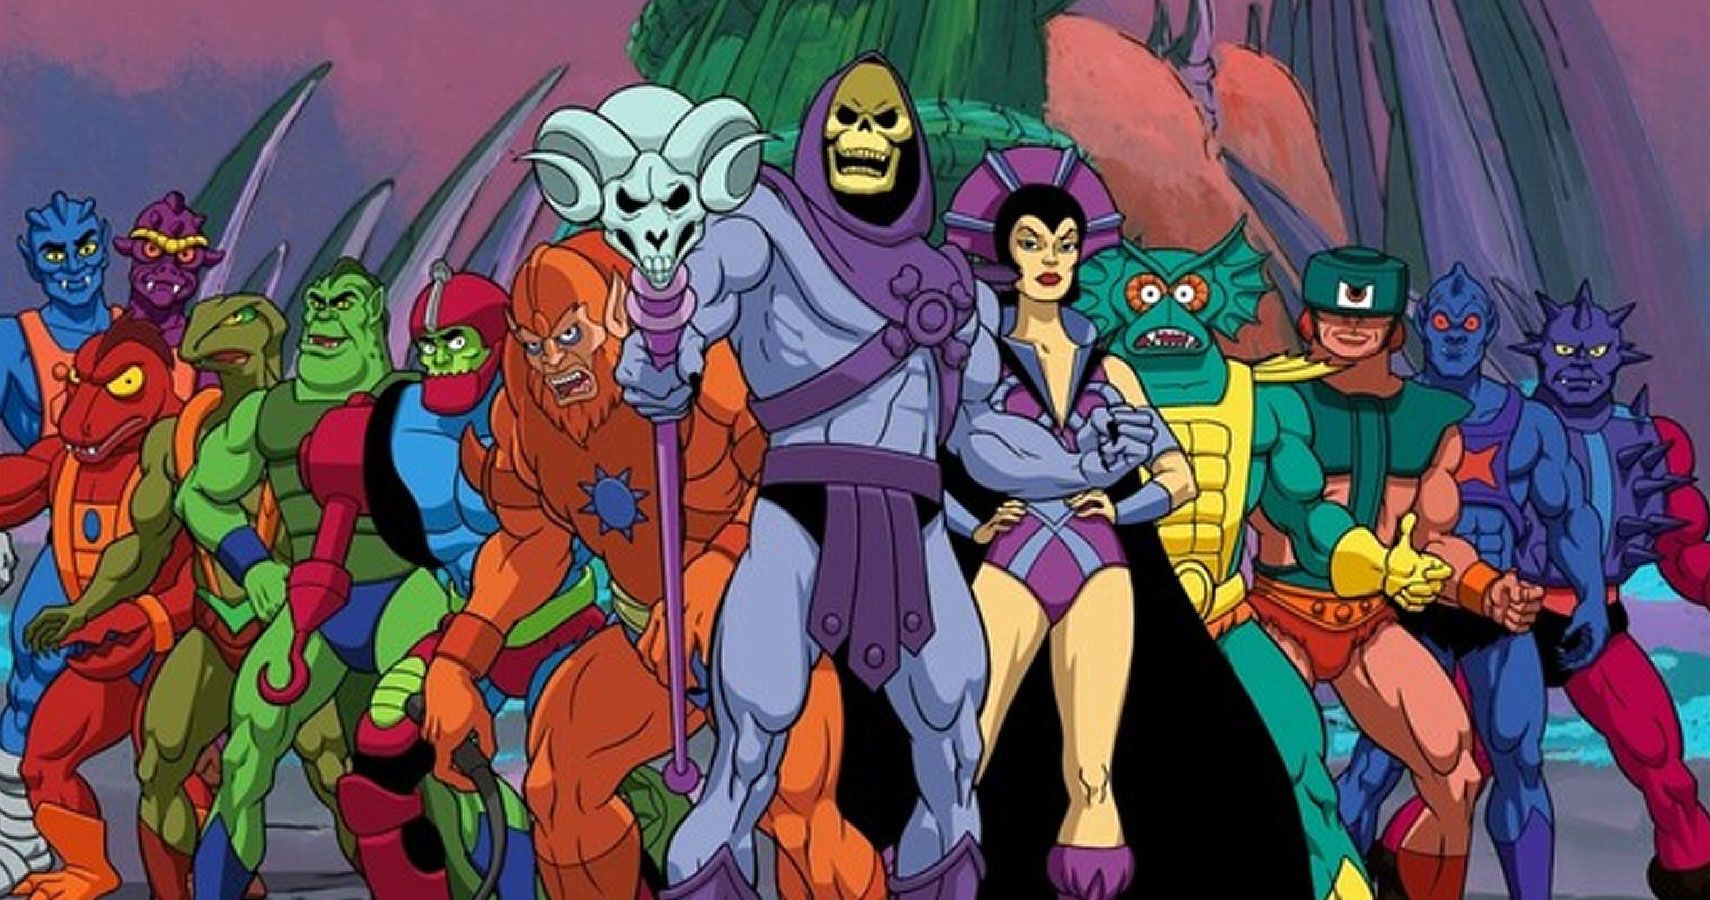 10 Smartest Villains In He-Man And The Masters Of The Universe, Ranked